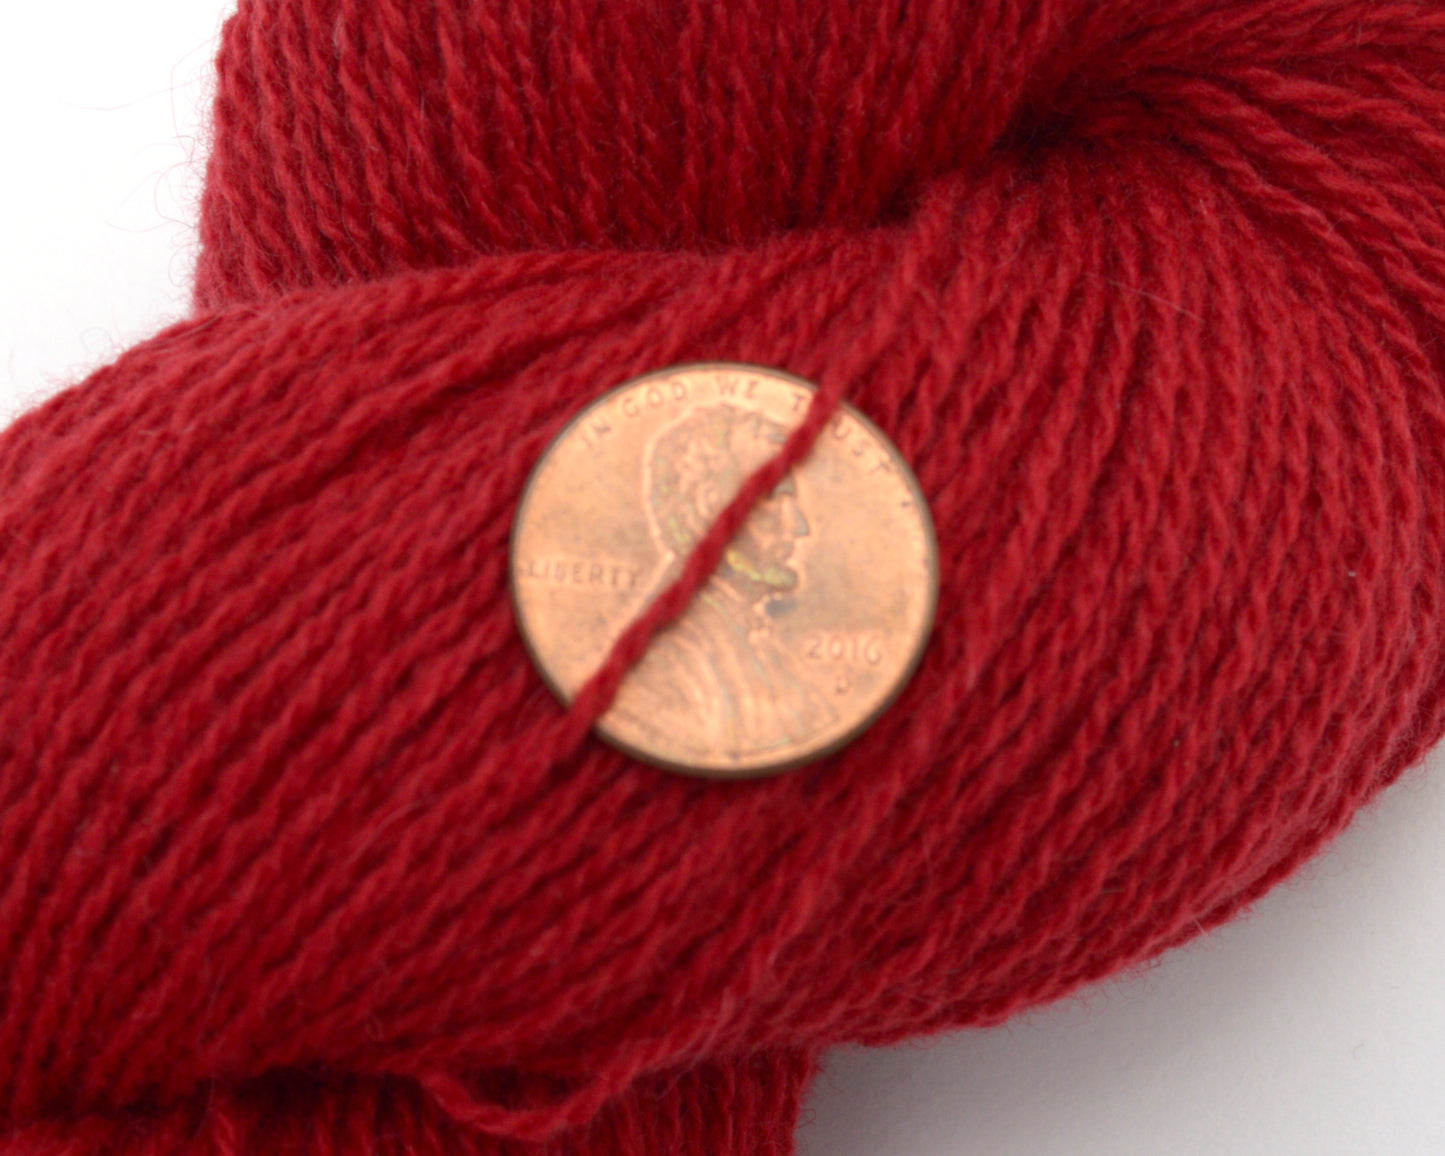 Lace Weight Recycled Cashmere Yarn in Classic Red